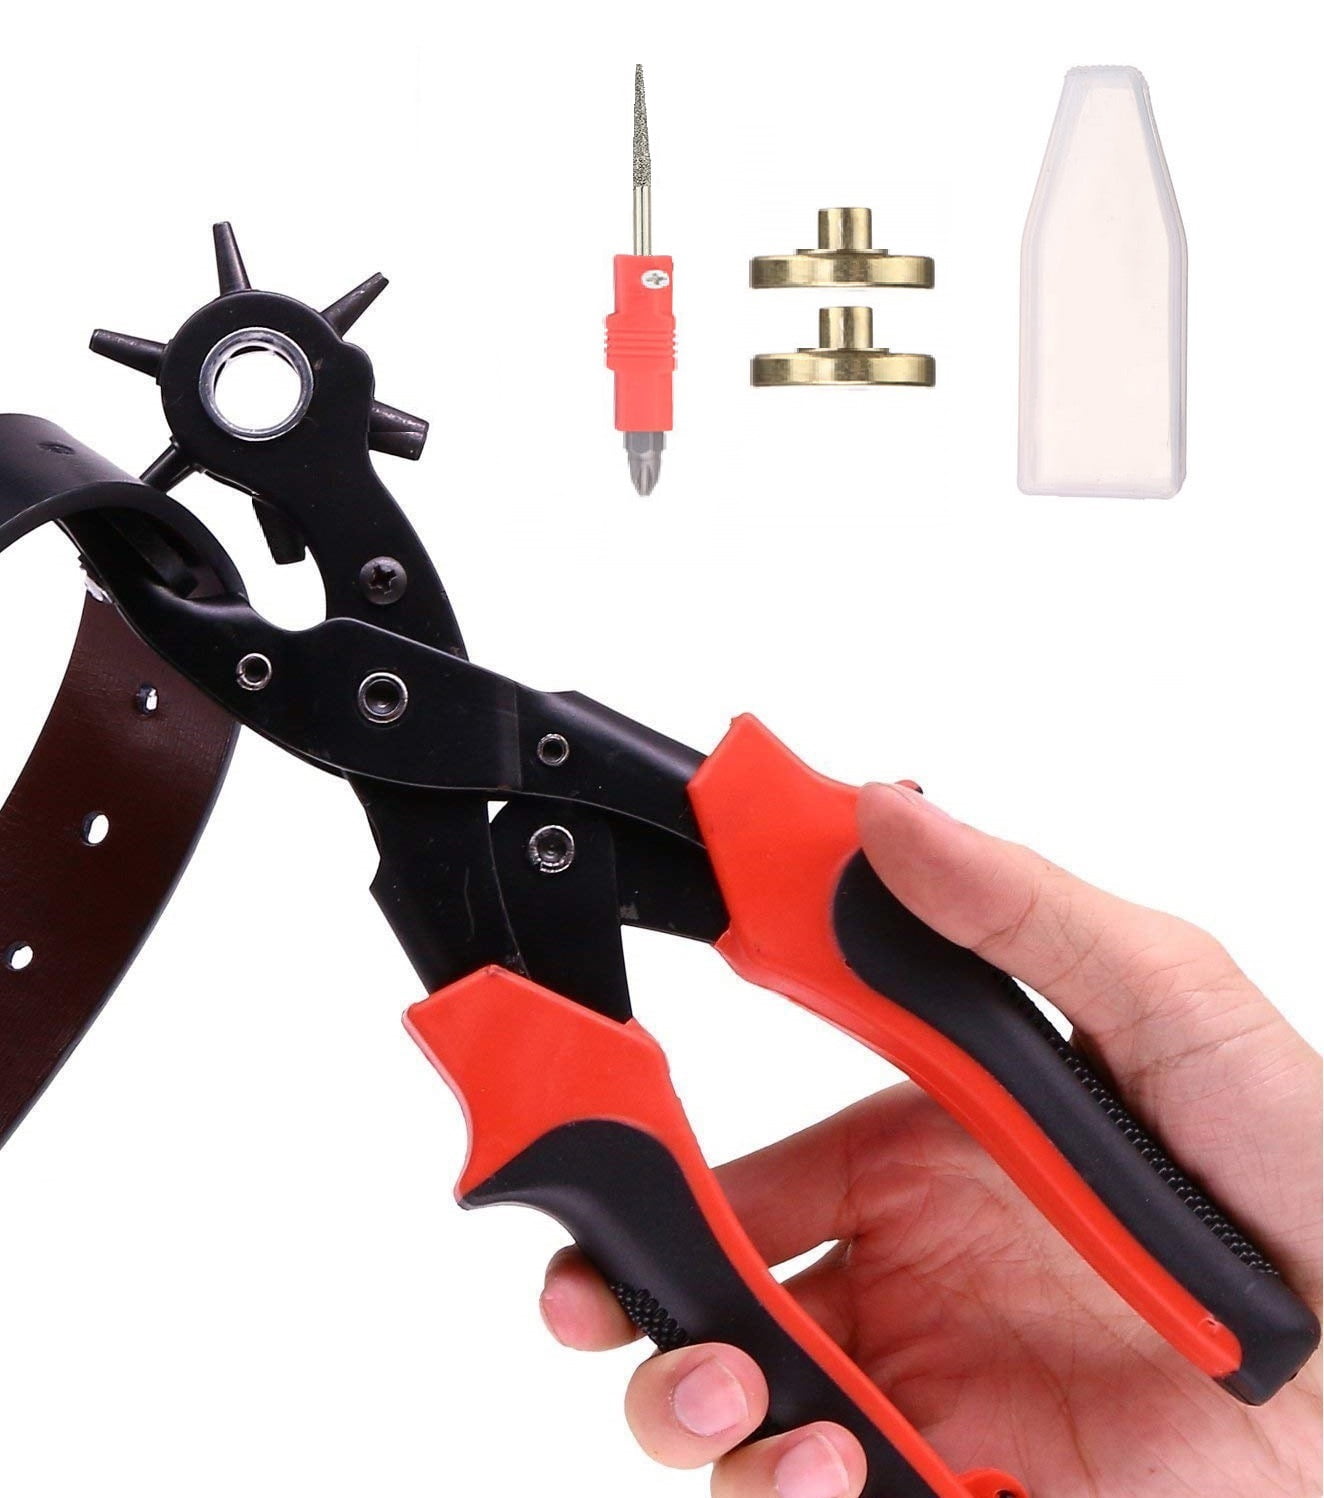  Leather Hole Punch,9 Belt Hole Puncher for Leather Heavy Duty,  6 Size Revolving Leather Belt Hand Hole Puncher (6 Size Revolving Leather  Hole Puncher) : Tools & Home Improvement